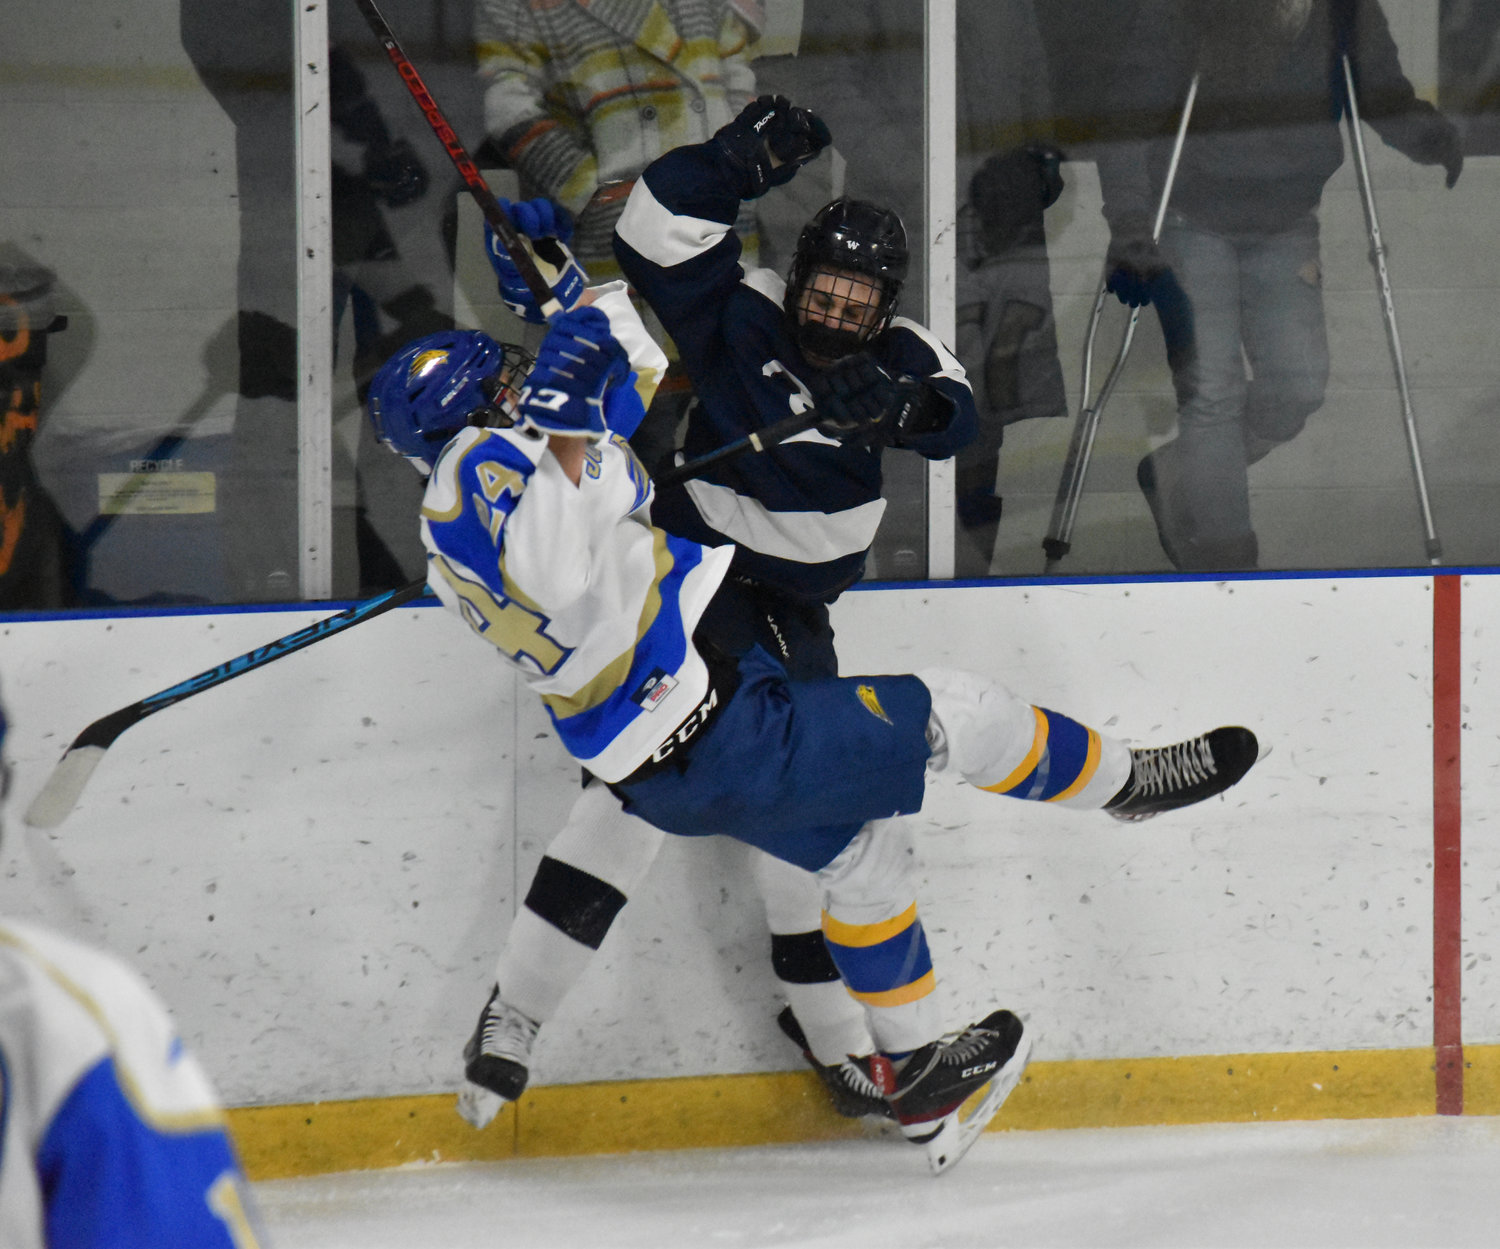 Hunter Strojny hits a St. John Paul II player during the Whalers' 6-2 win Wednesday.